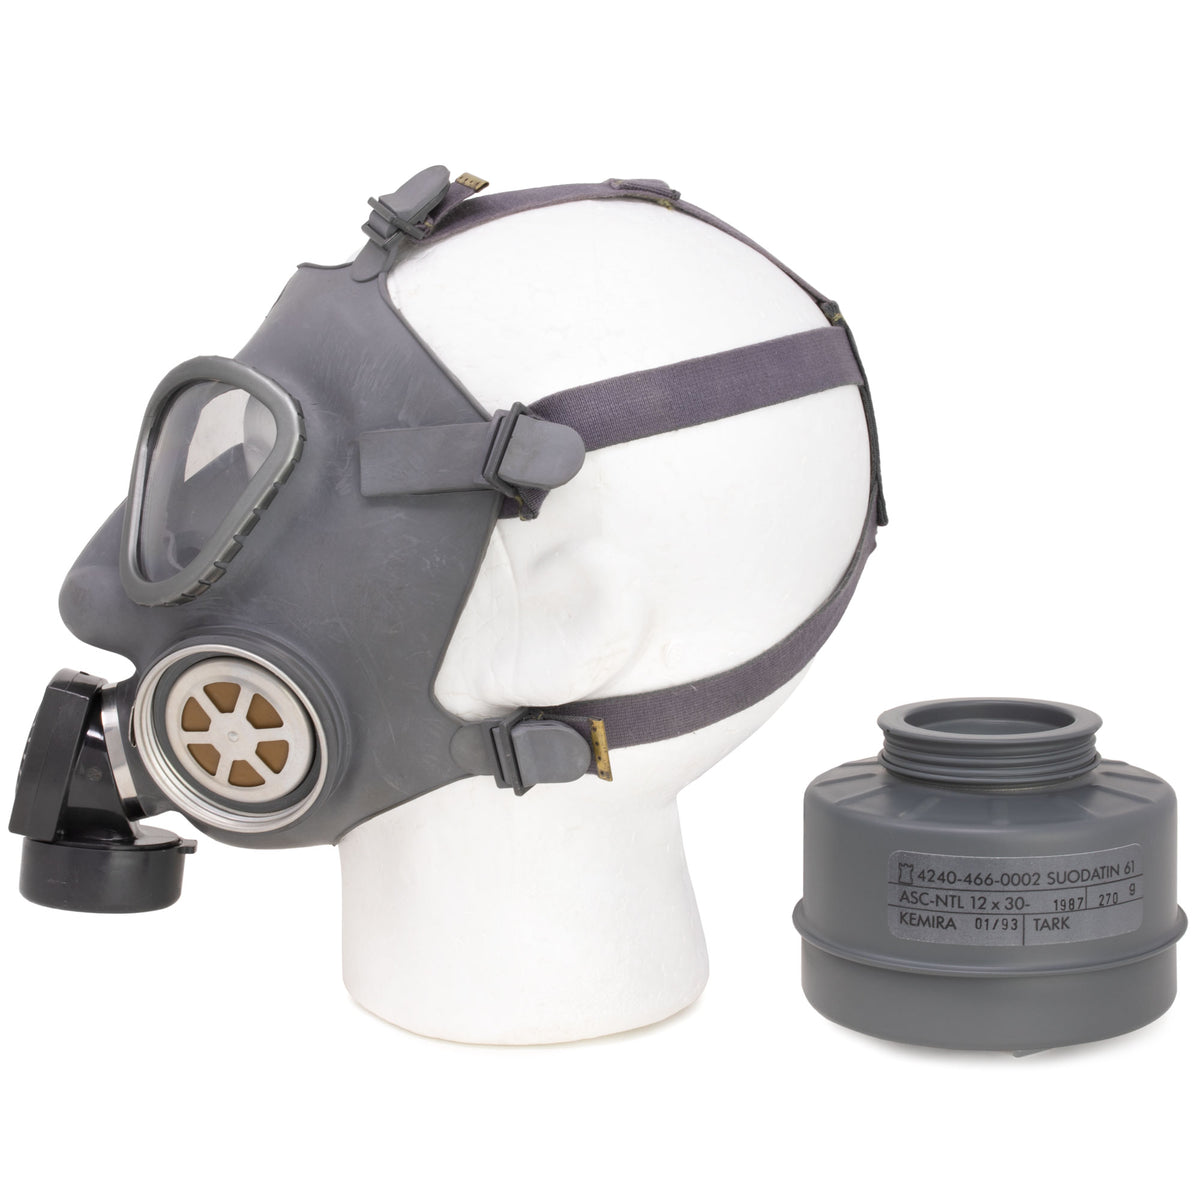 Finnish Army Gas Mask & Filter